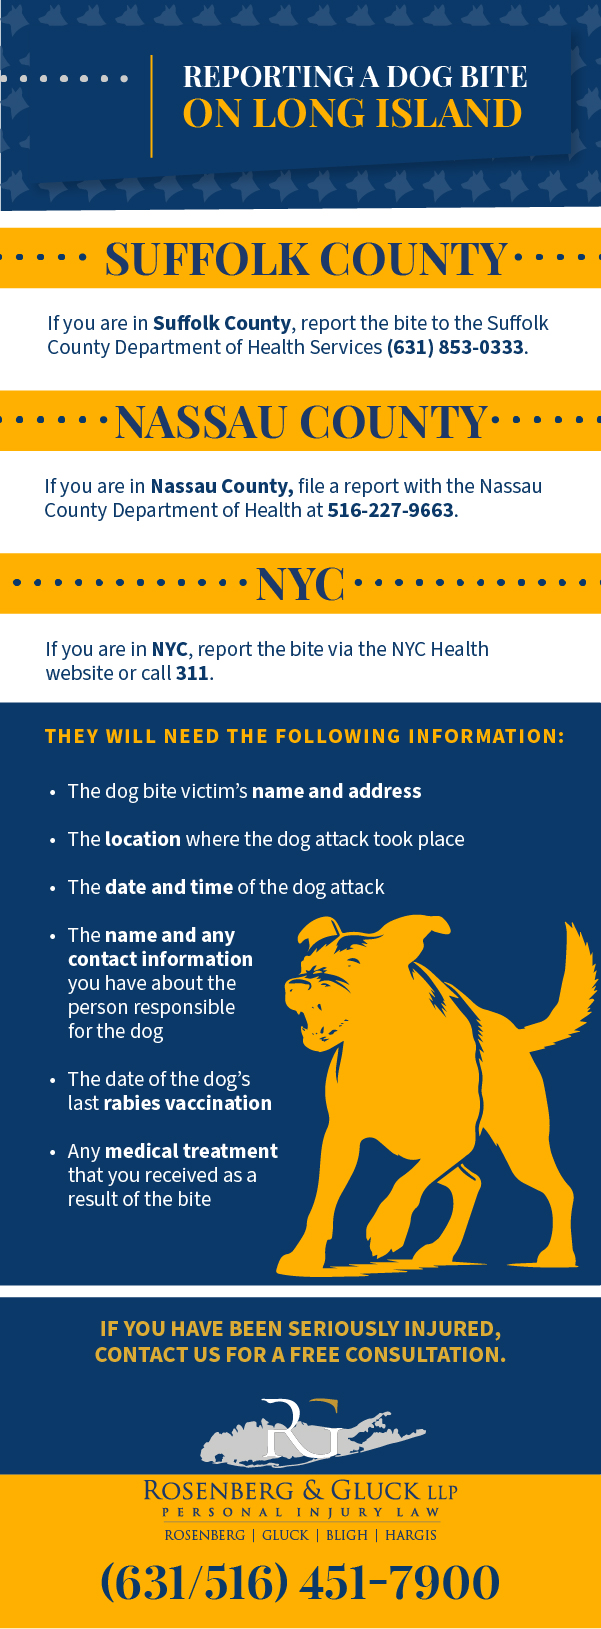 Reporting a Dog Bite on Long Island